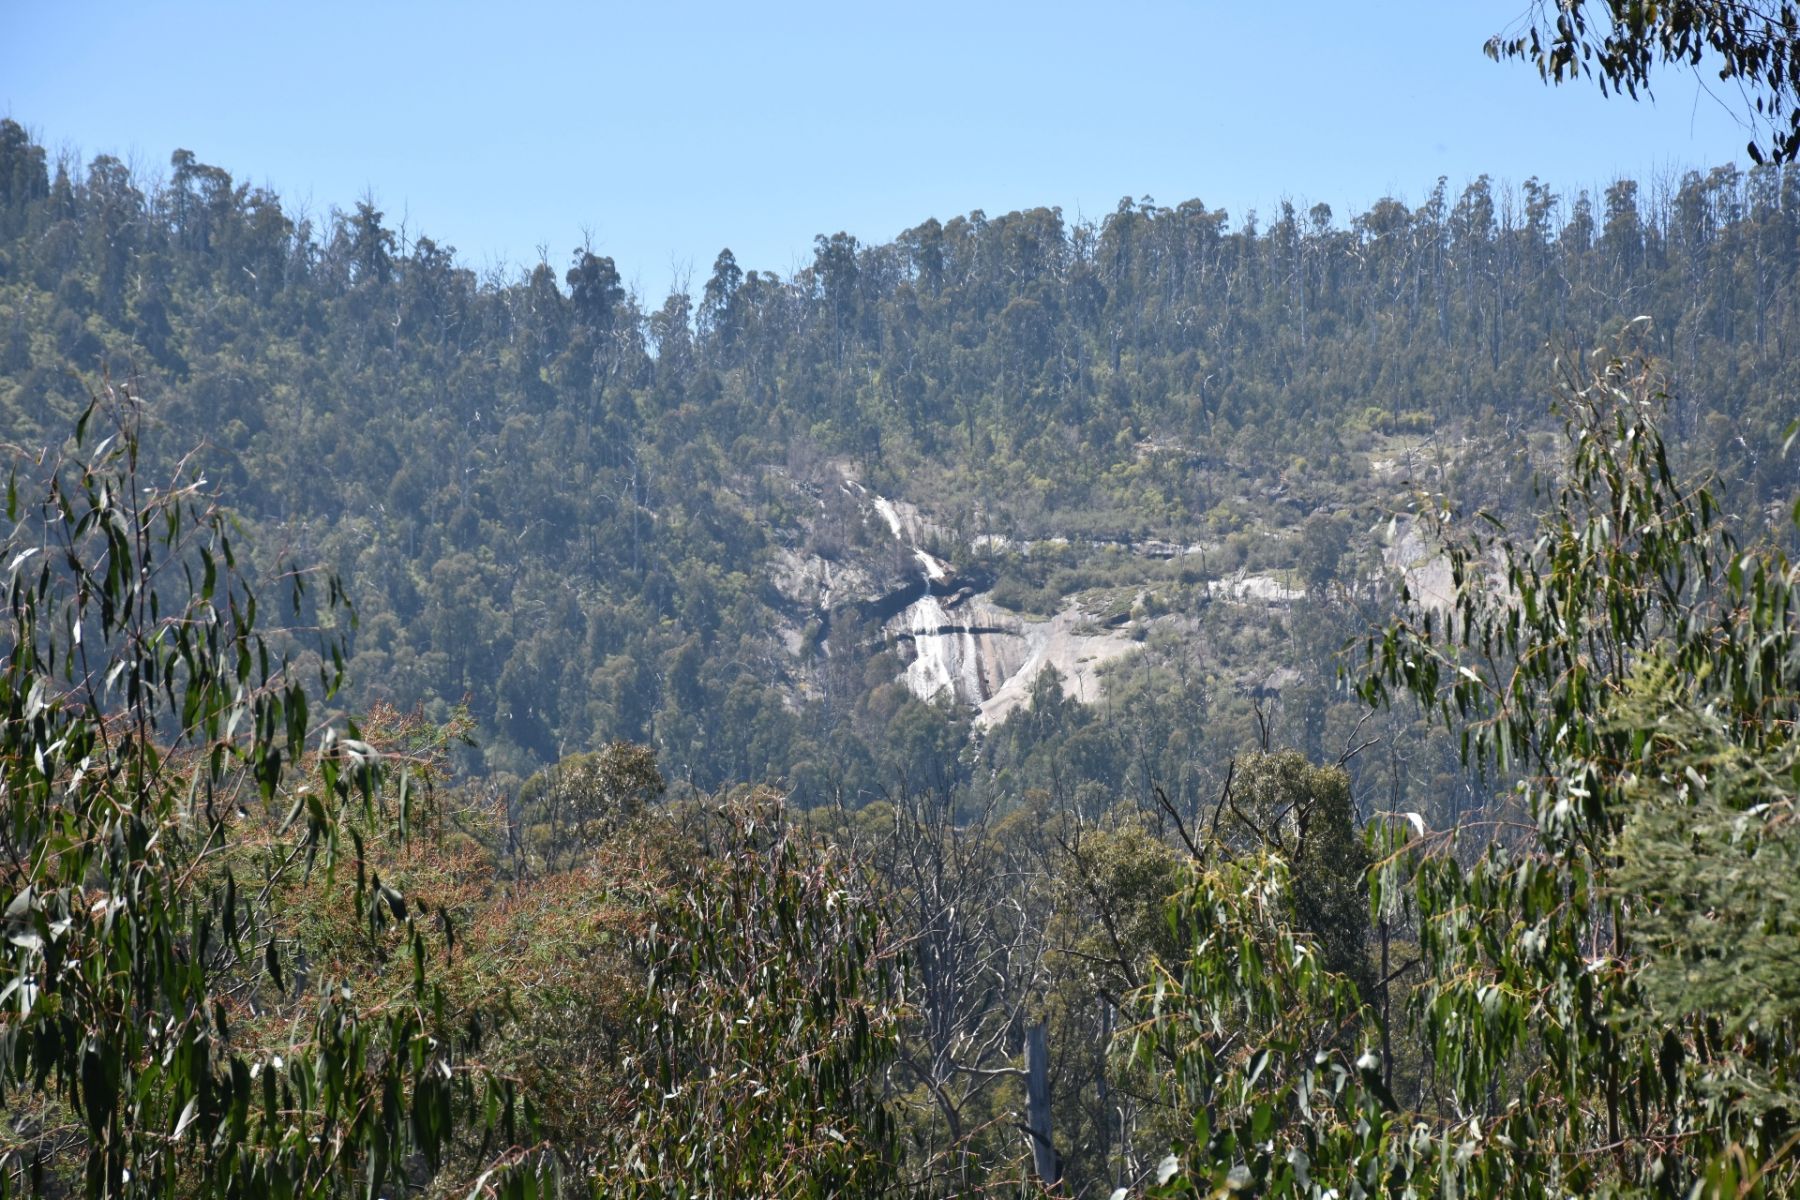 A view through trees to a rock face and waterfall on the opposite hill